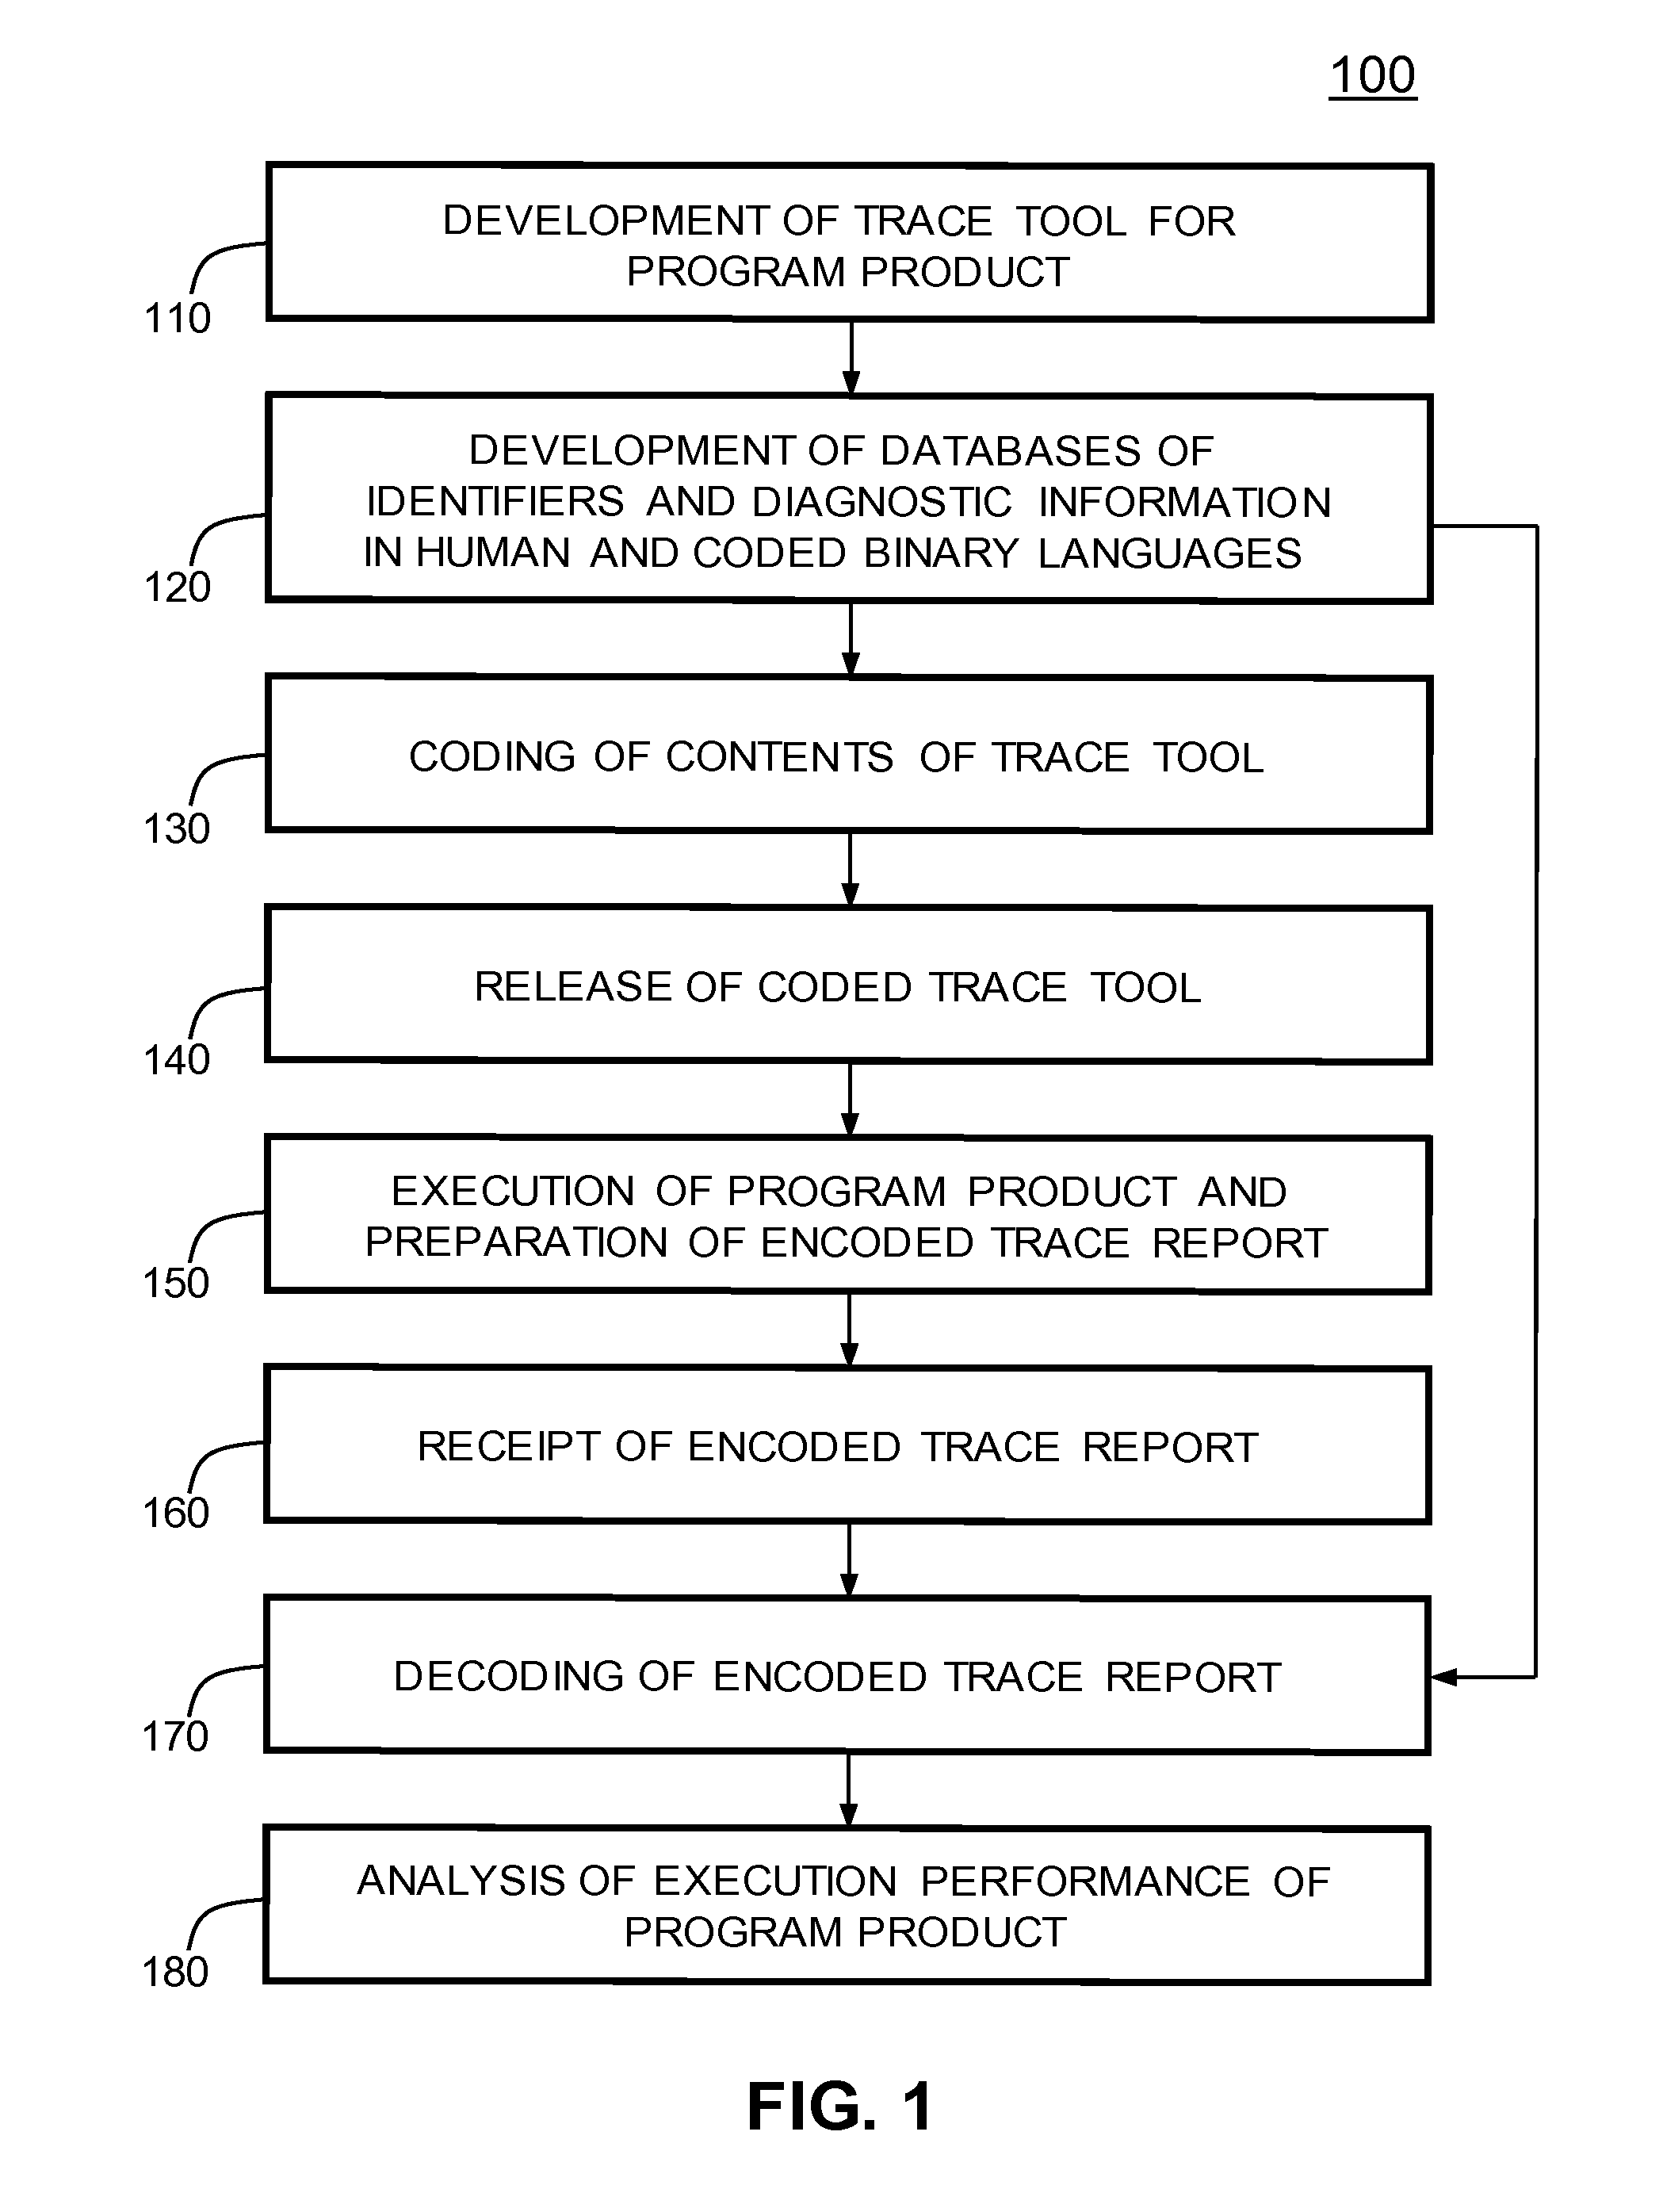 Method and system for monitoring execution performance of software program product